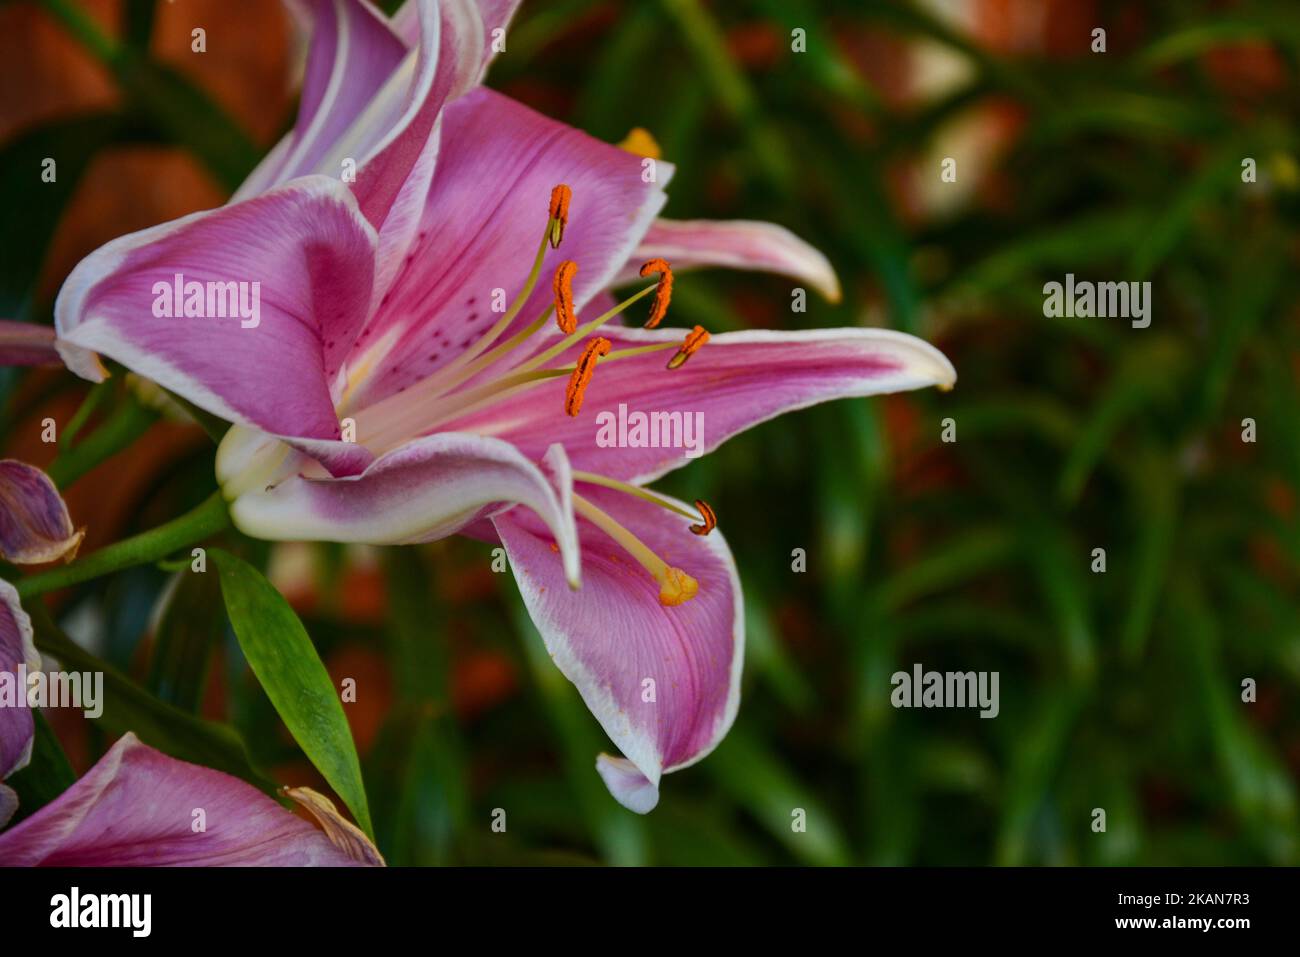 A close up of a beautiful pink Lilium brownii flower Stock Photo